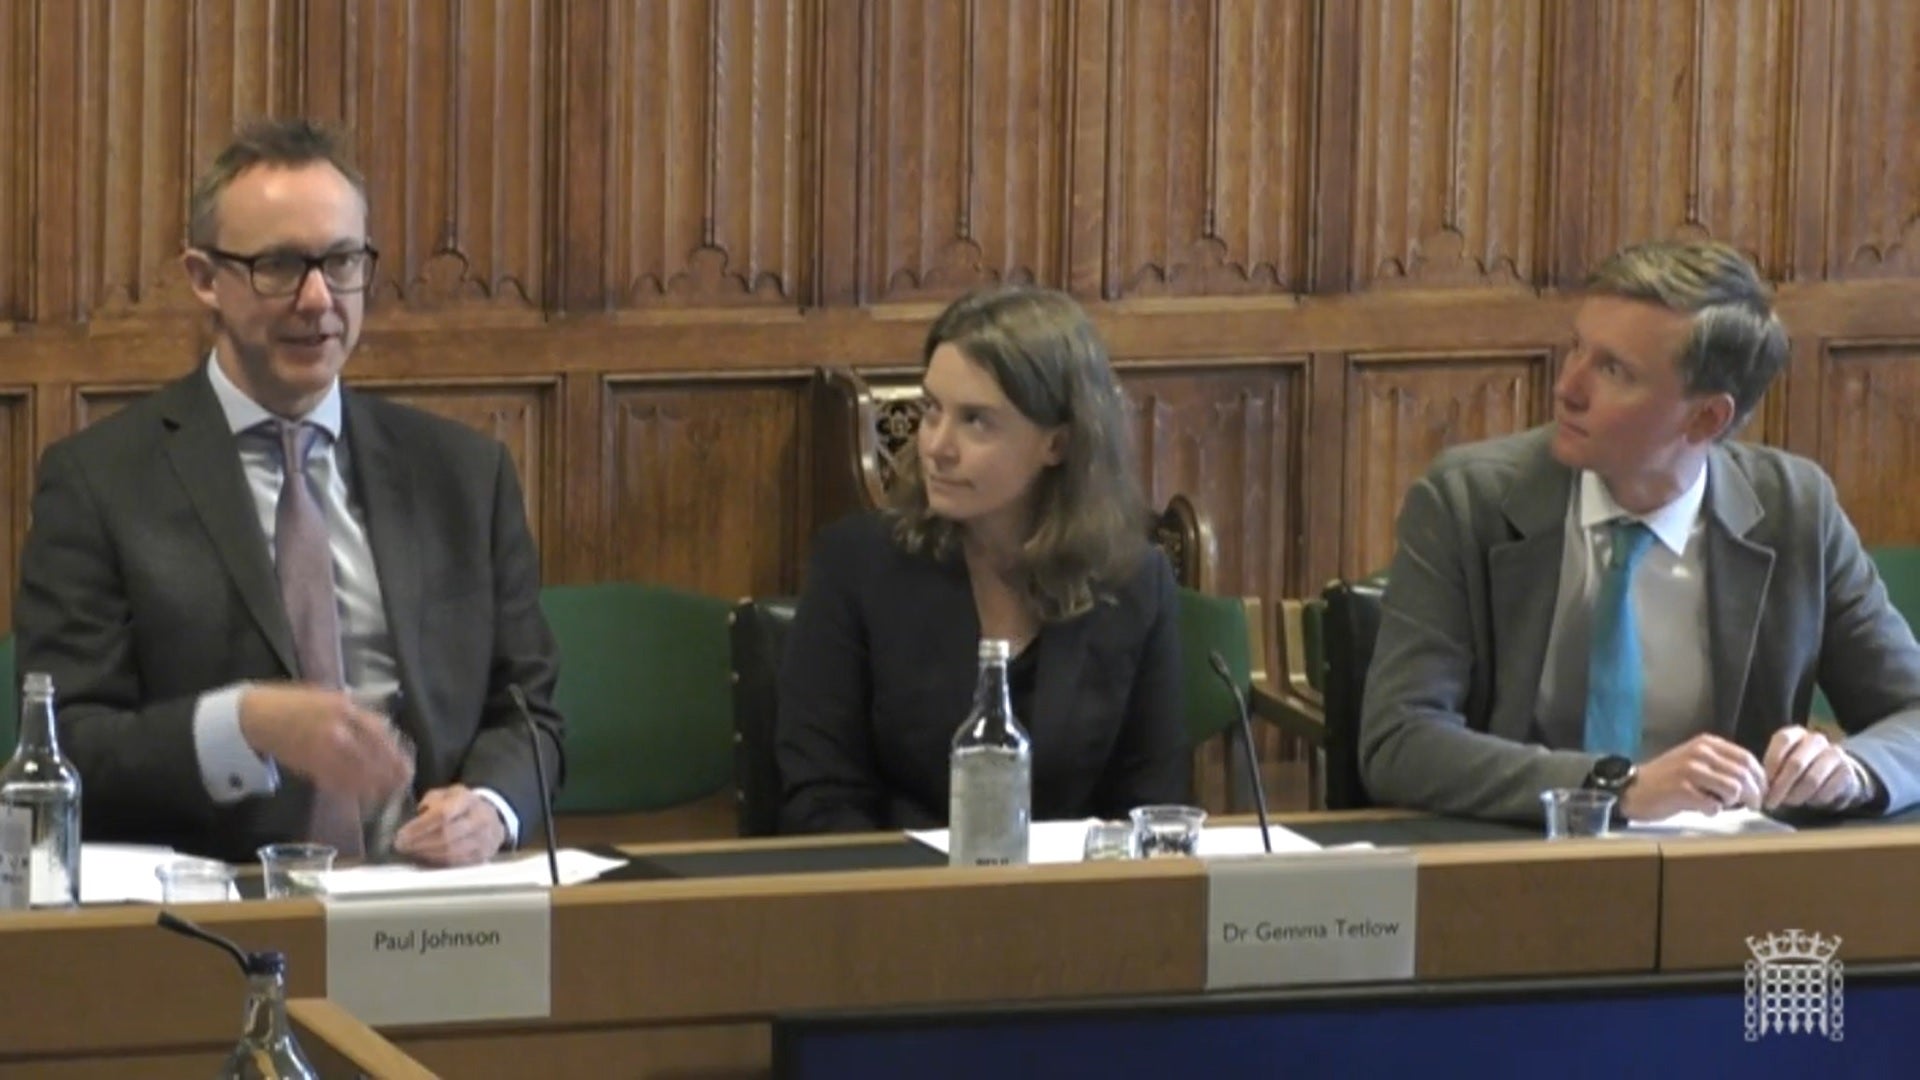 Economists from the IFS, IfG and RF appeared before MPs to discuss the Spring Statement. (ParliamentTV / PA)